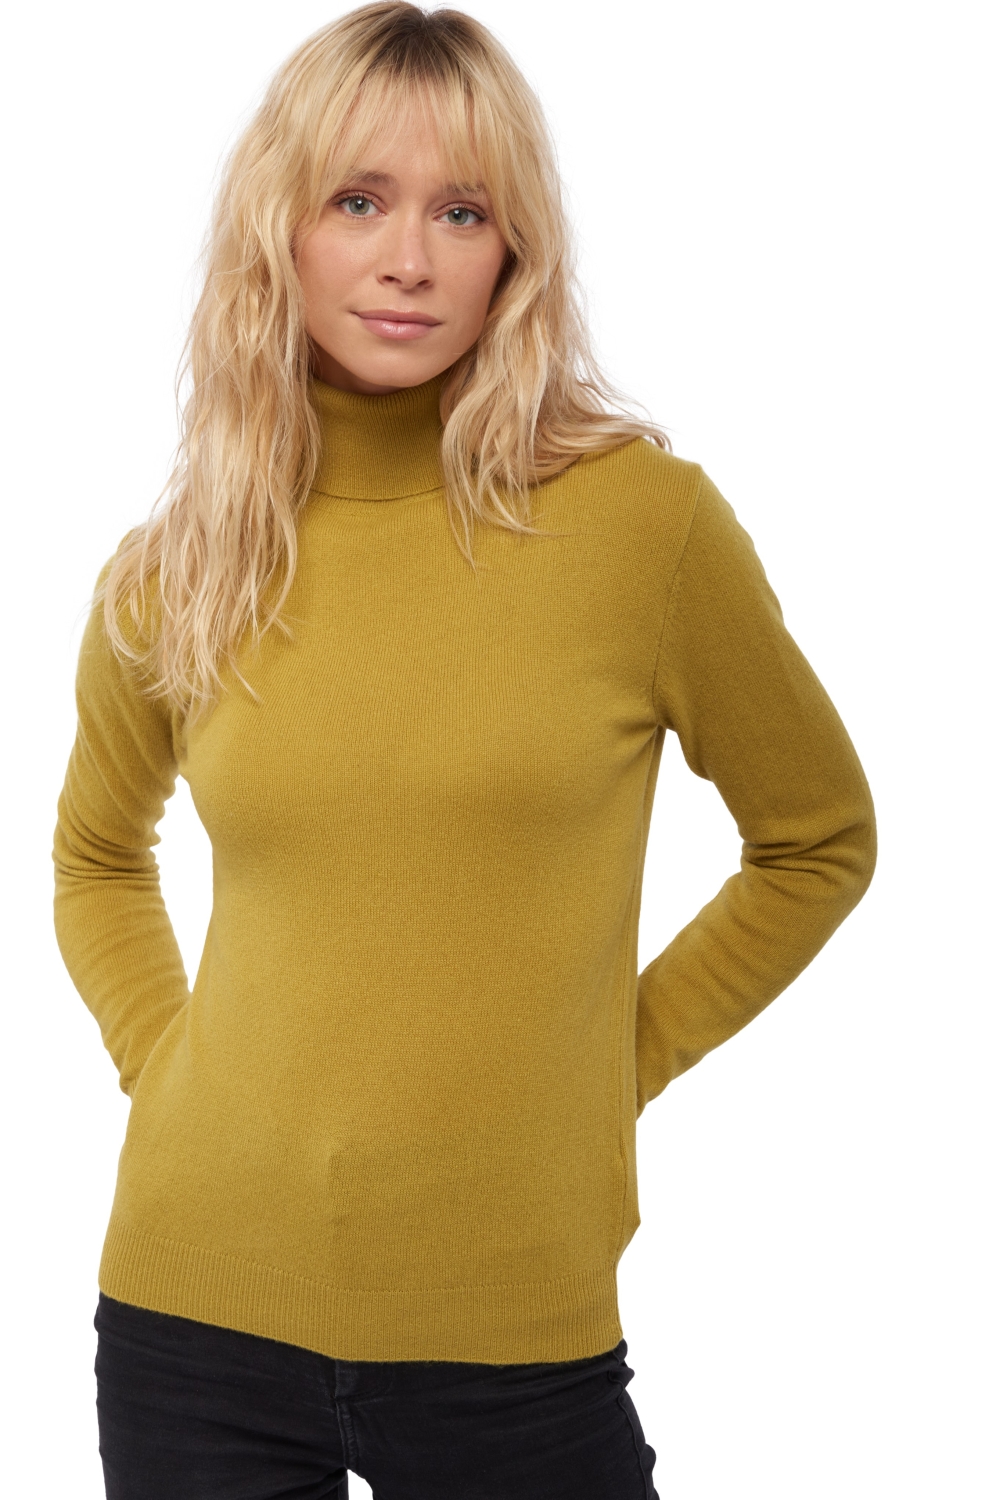 Cashmere ladies roll neck tale first caterpillar l